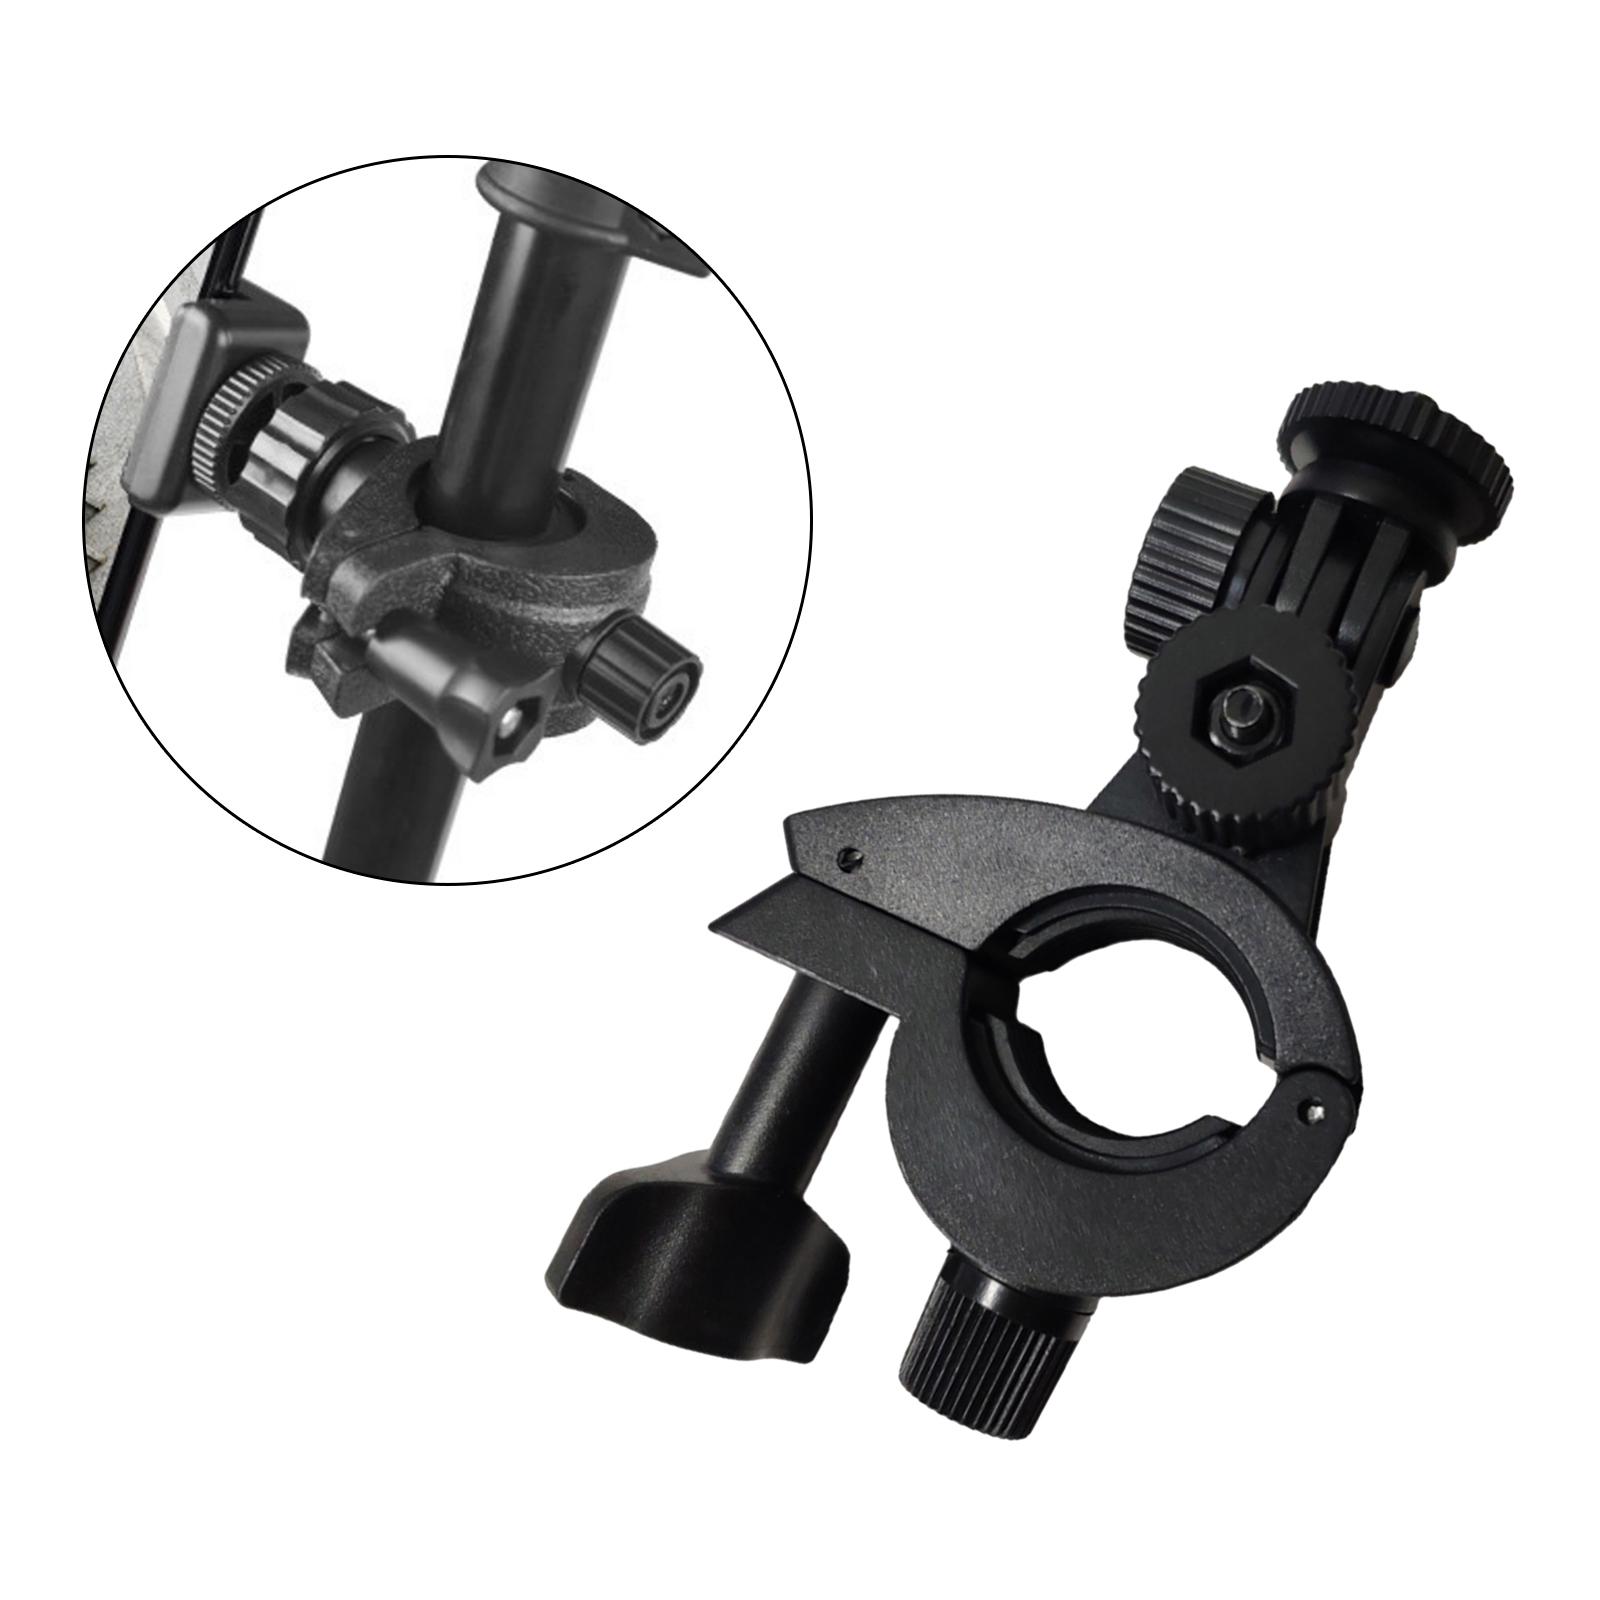 Phone Mount Clamp for Live Stream Photo Studio Vlogging Photography Filming